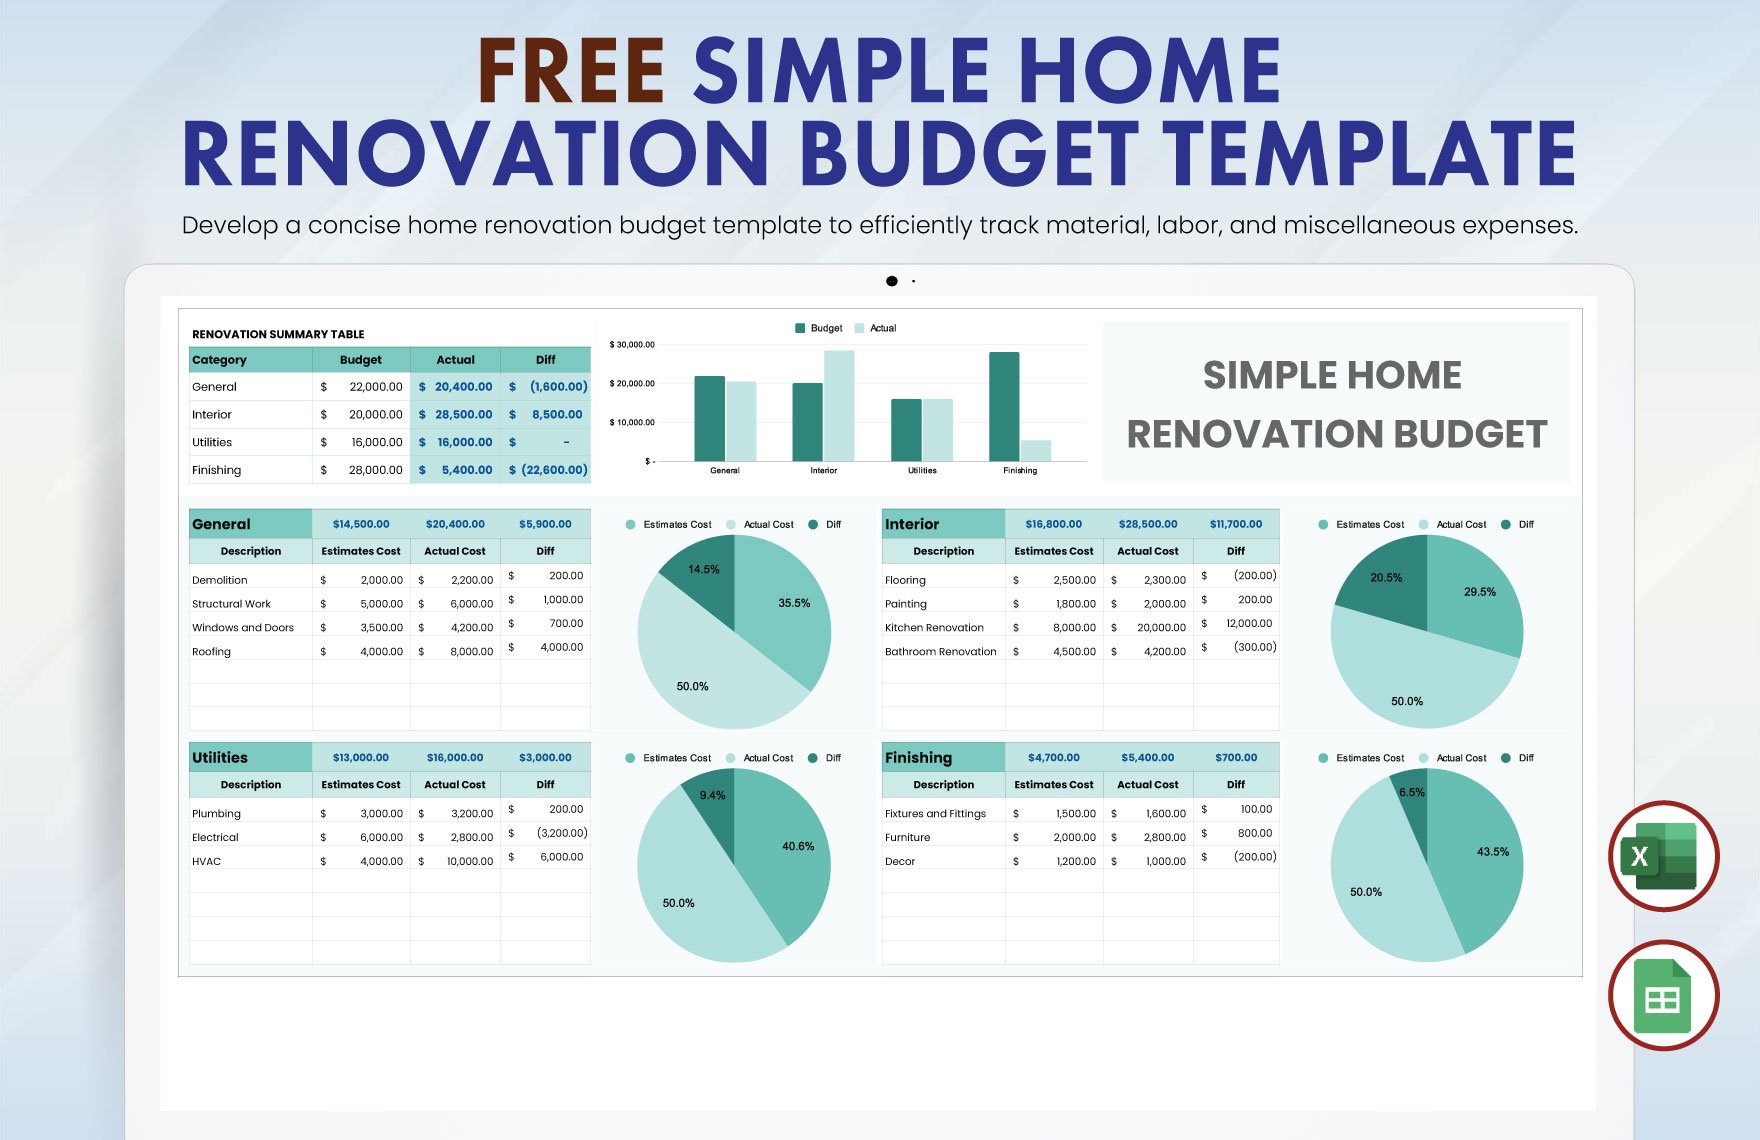 Simple Home Renovation Budget Template